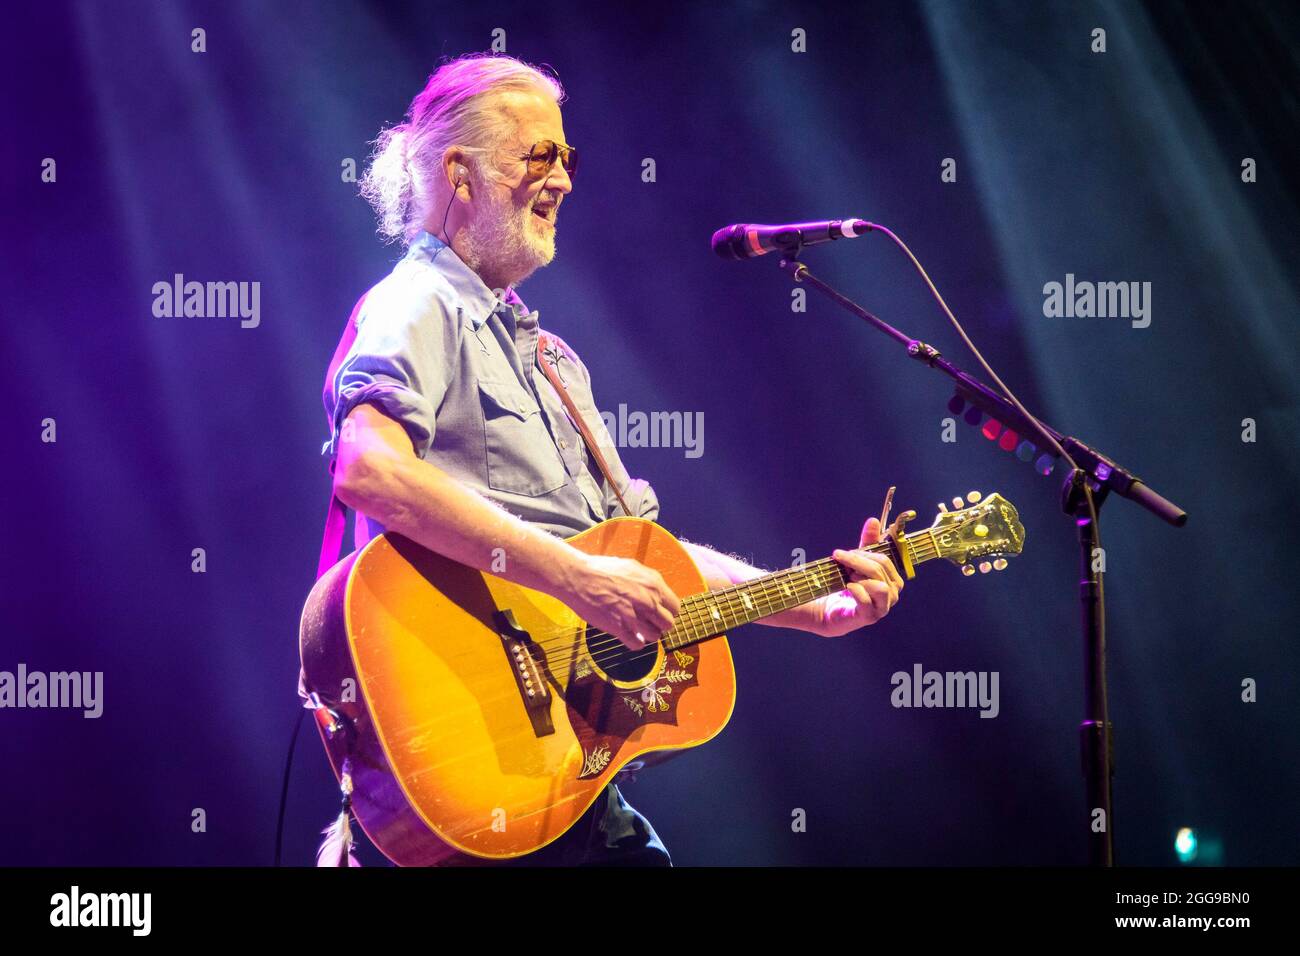 Greg Keelor, lead guitarist of the Canadian country rock band BLUE RODEO performing at a "Sold Out Show" at the Budweiser Stage in Toronto, Canada. (Photo by Angel Marchini / SOPA Images/Sipa USA) Stock Photo